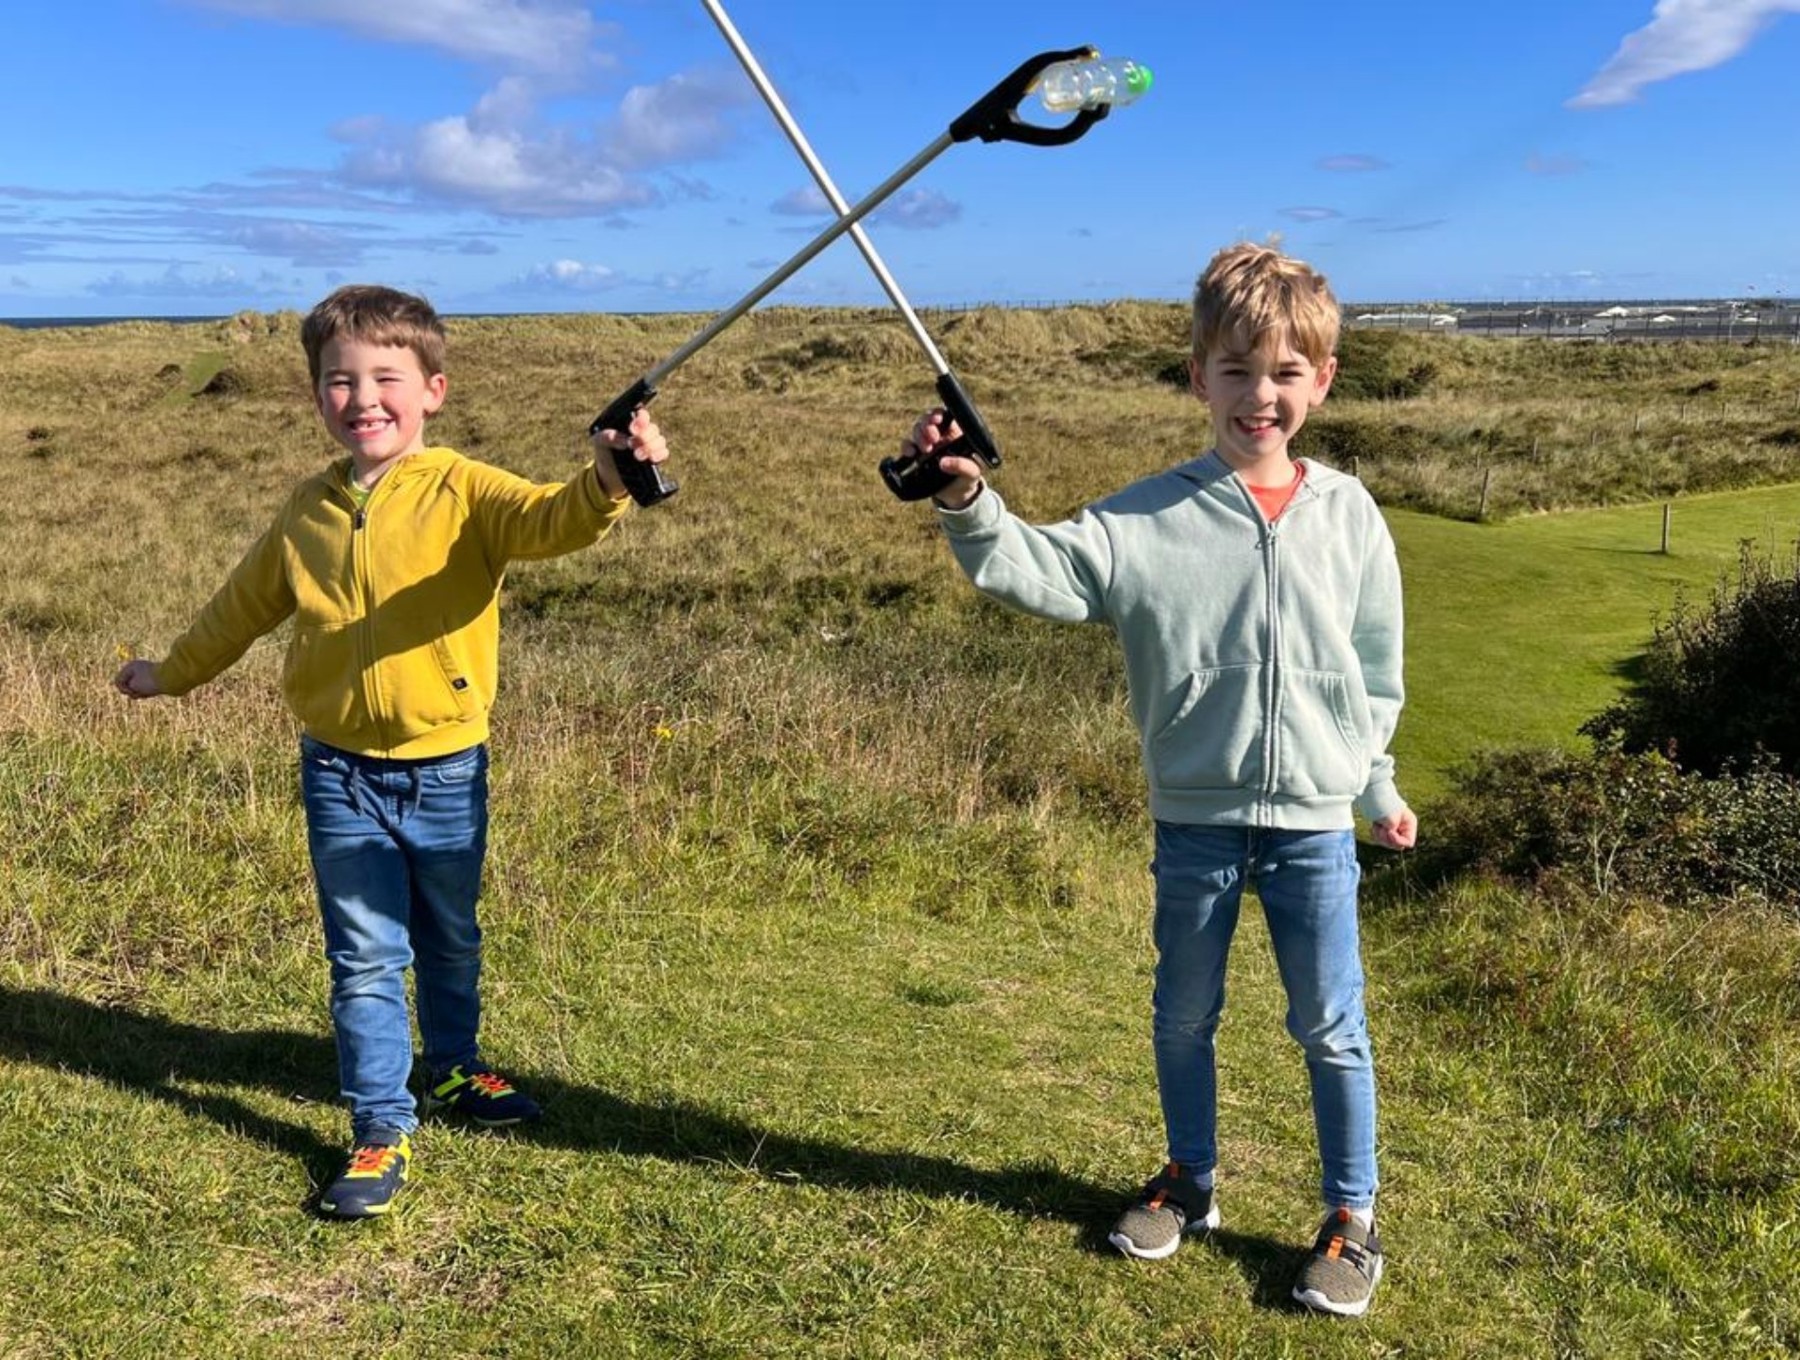 A Cub and Beaver are stood on grass with litter pickers in their hands as they pick up rubbish in their local area. Both are wearing jeans and jackets and smiling at the camera.